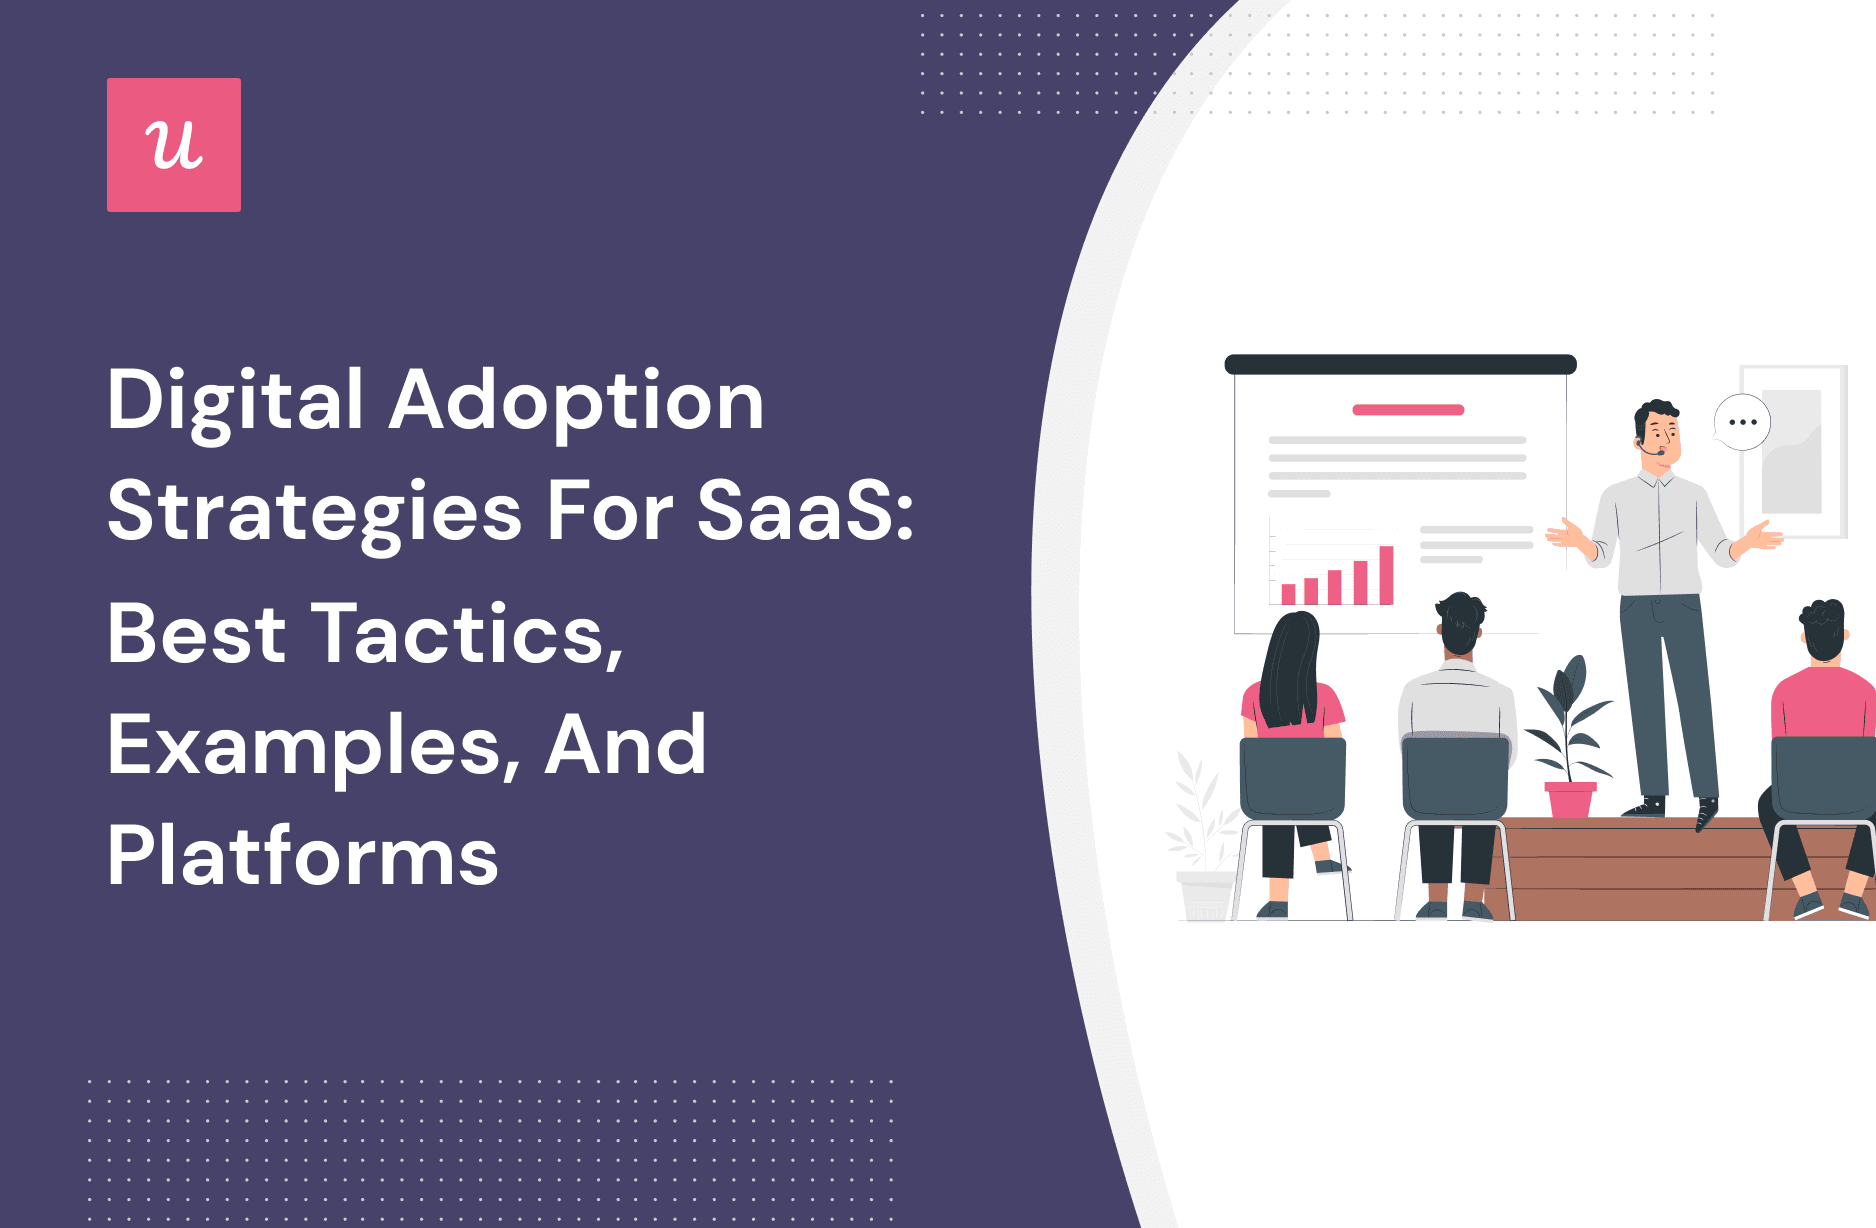 Digital Adoption Strategies for SaaS: Best Tactics, Examples, and Platforms cover